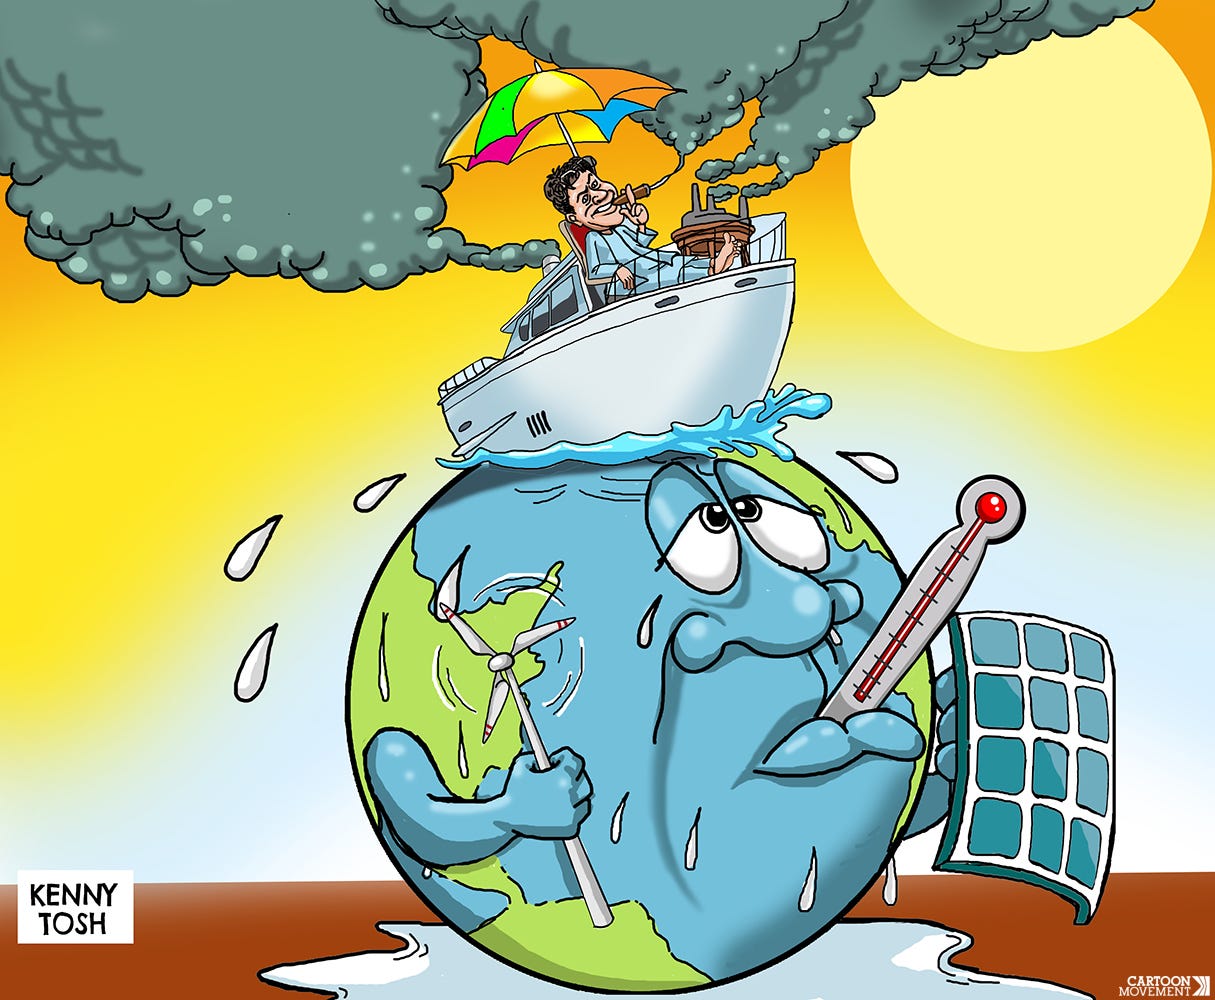 Cartoon showing a sweating death trying to cool itself down with a wind turbine and a solar panel, while a rich man sitting in a giant yacht on top of the planet is happily pumping out emissions.